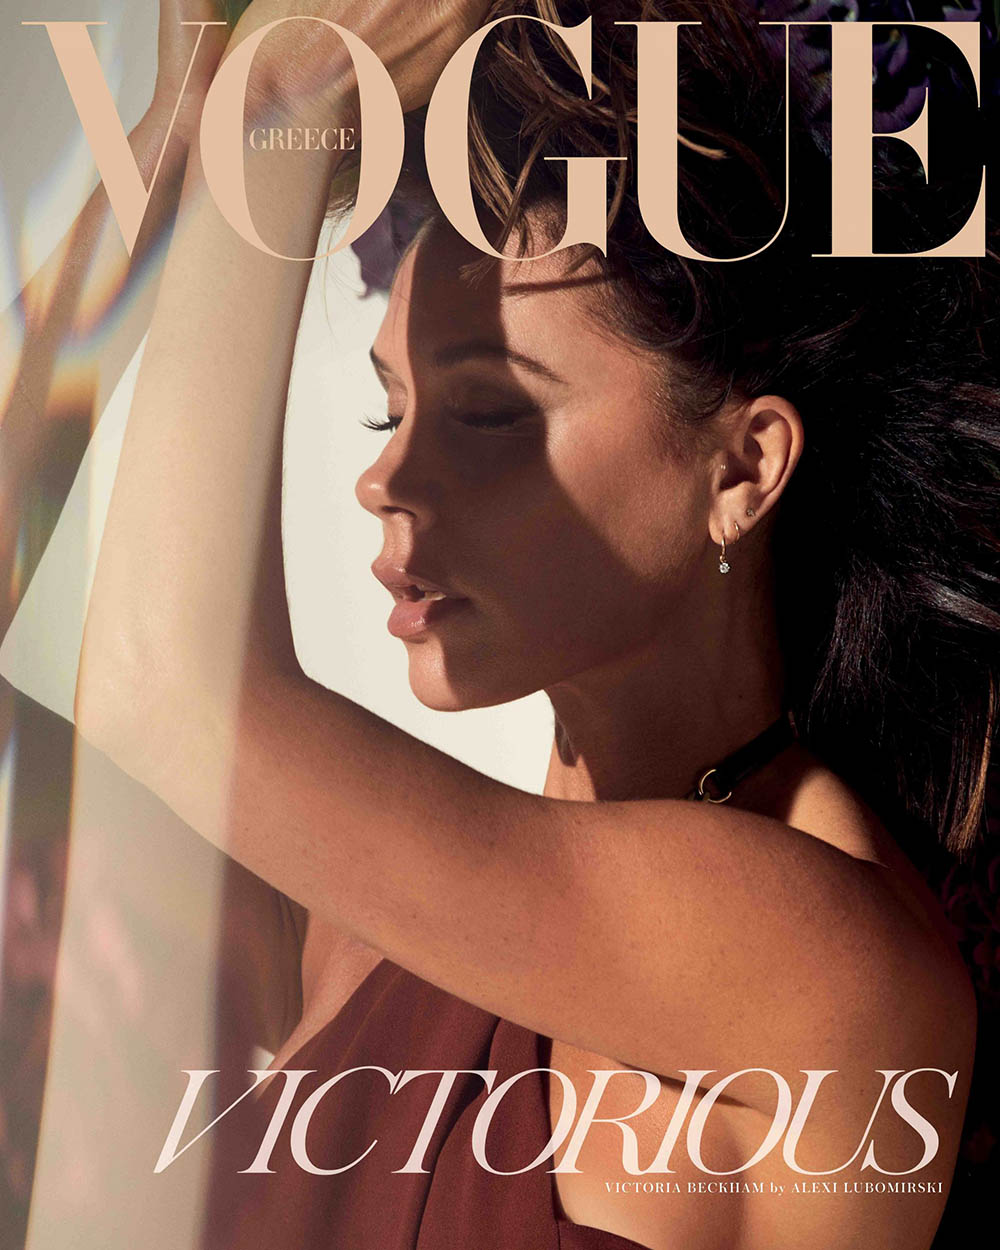 Victoria Beckham covers Vogue Greece March 2020 by Alexi Lubomirski